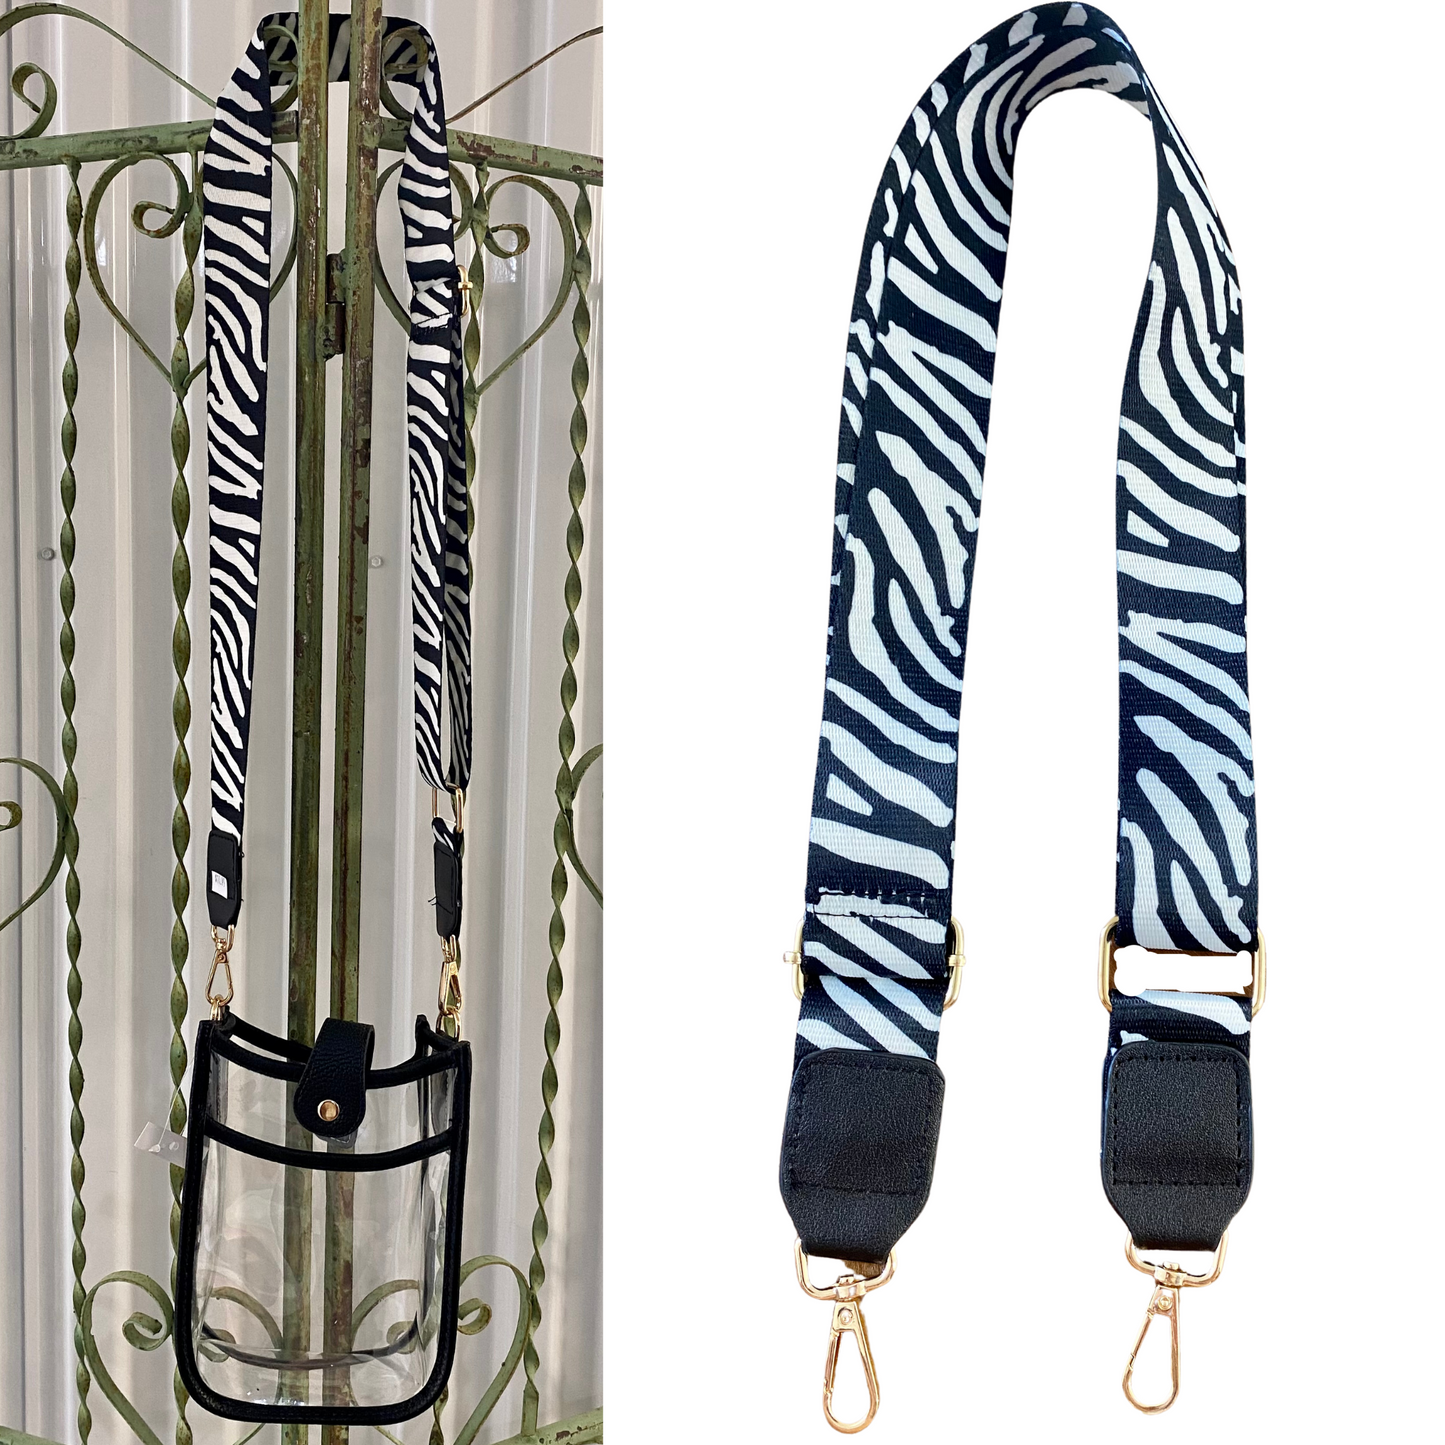 Change the look of any purse! These stylish guitar style strap adds a pop of color and fashion to any bag, big or small. Adjustable down to 29 inches for a belt bag, or 52 inches at its longest length for a crossbody strap. The newest trend in handbags, at a fraction of the designer price! The Zebra Adjustable Purse Strap